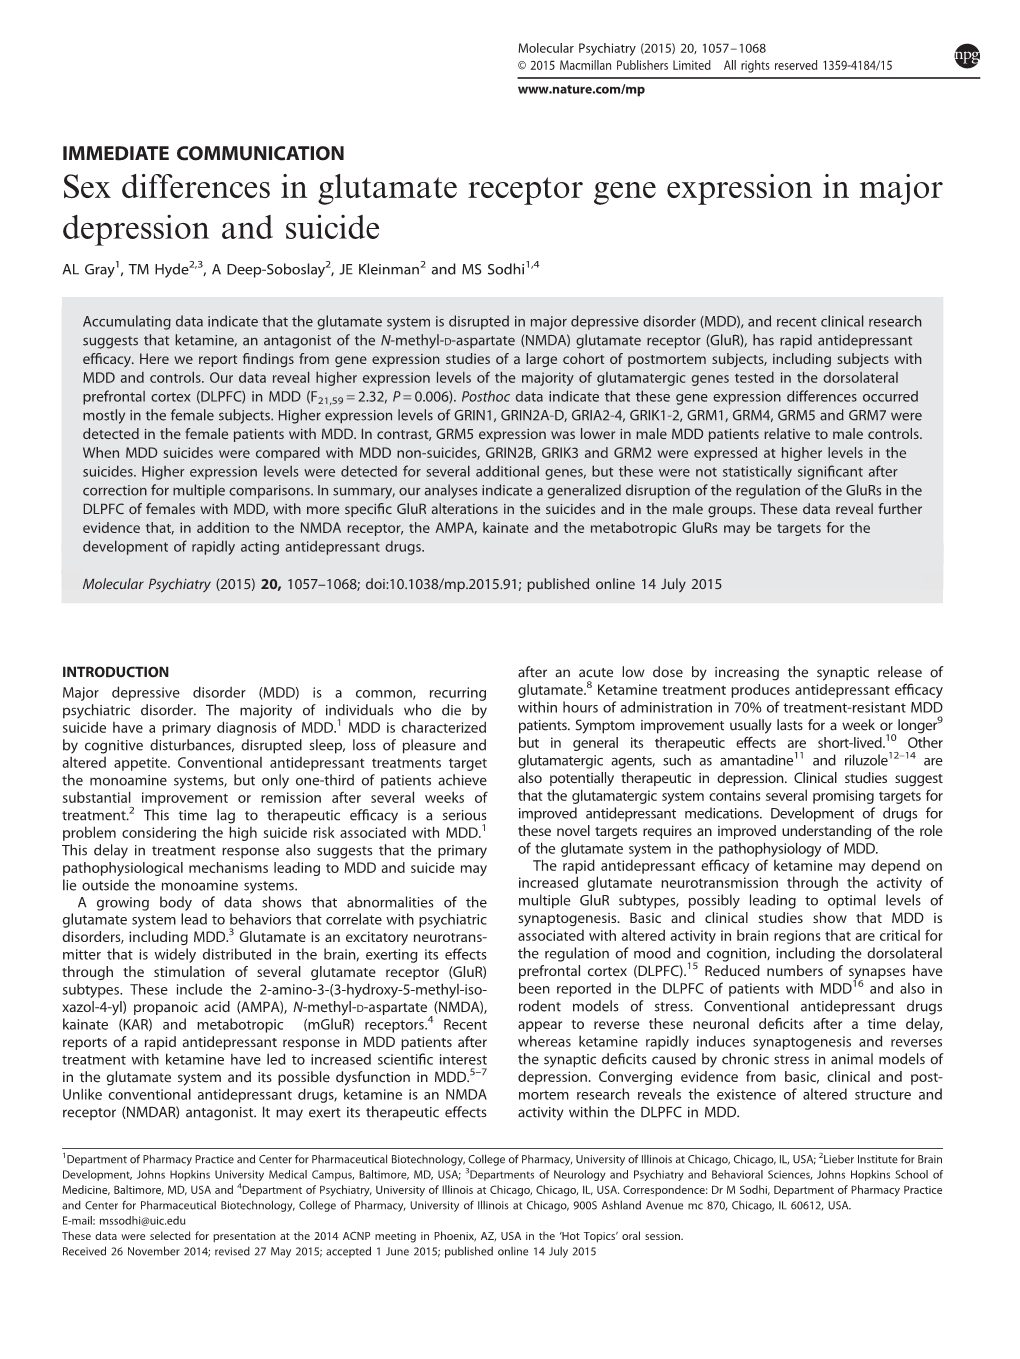 Sex Differences in Glutamate Receptor Gene Expression in Major Depression and Suicide